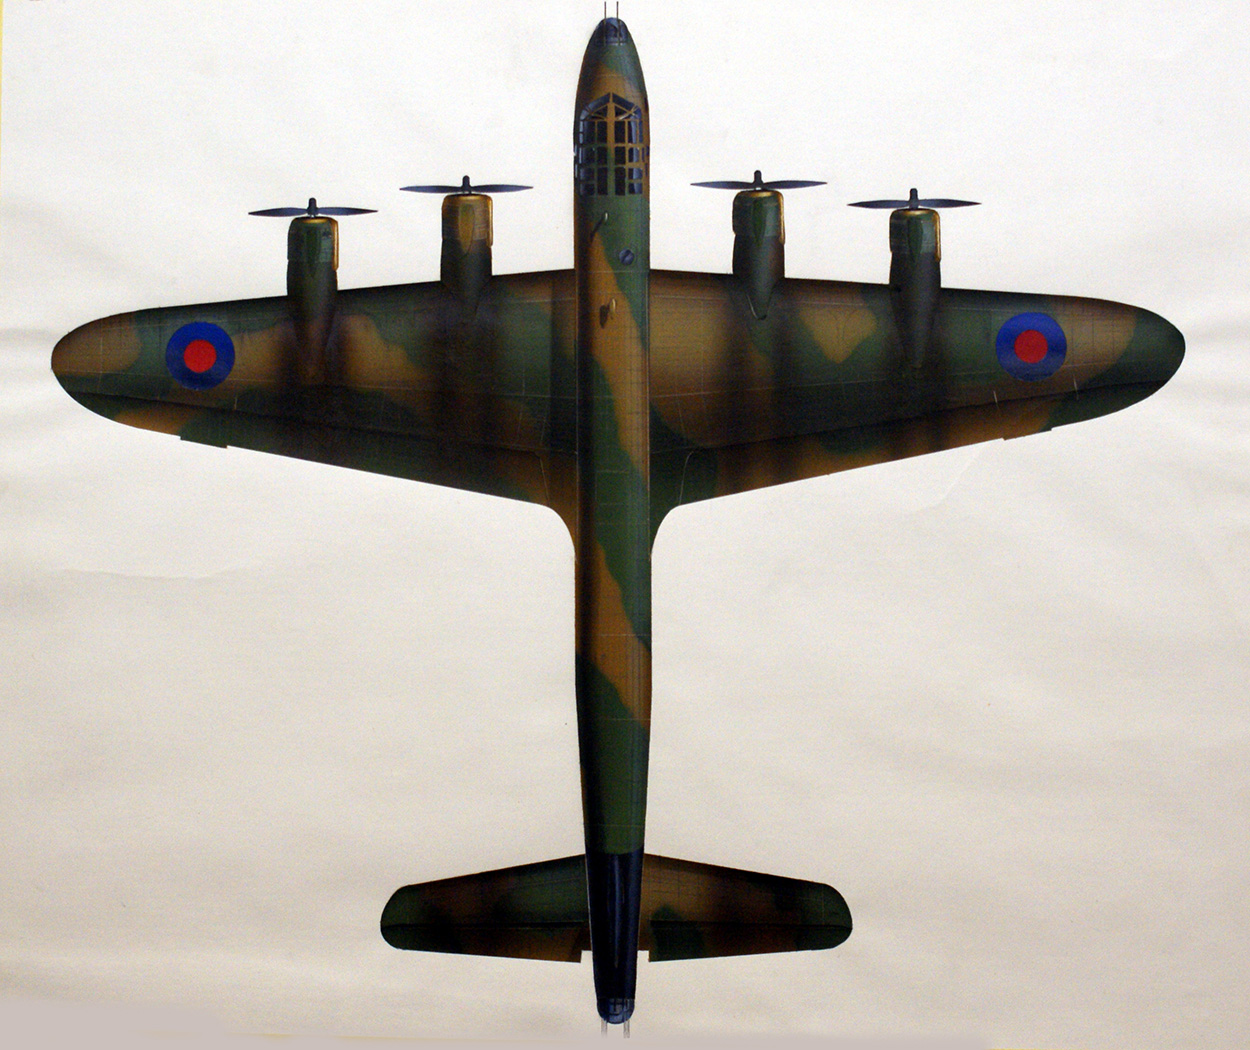 Short Stirling Bomber from above (Original) art by Keith Fretwell at The Illustration Art Gallery